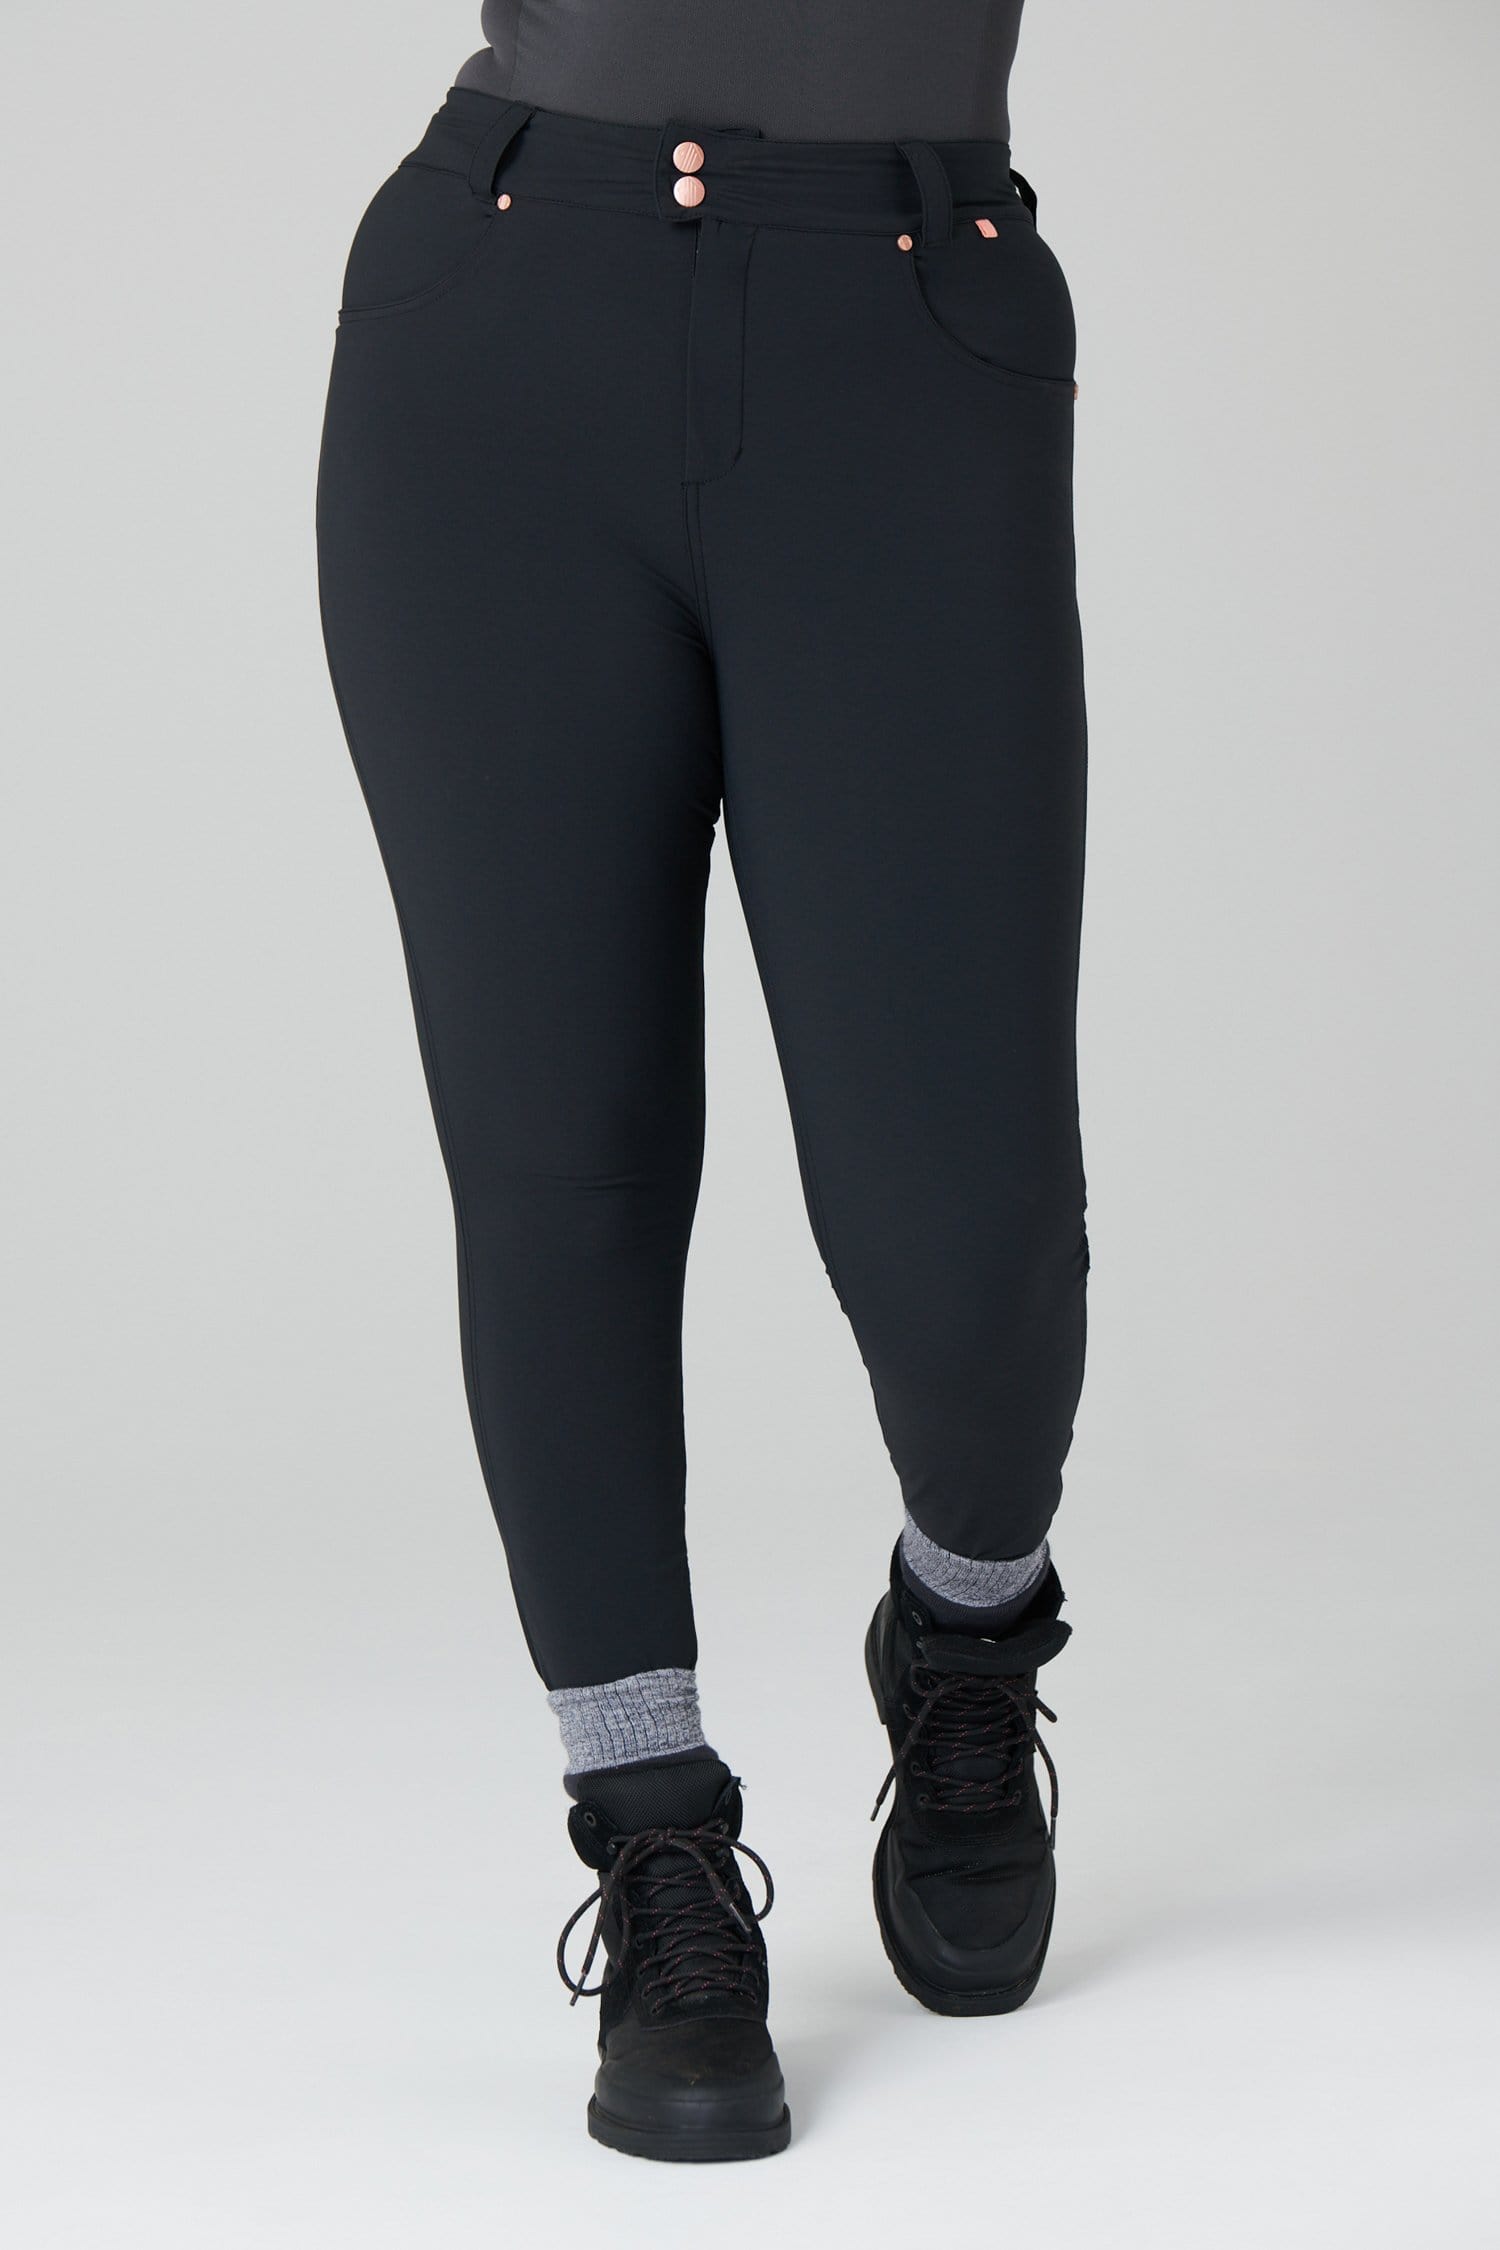 The Shape Skinny Outdoor Trousers - Black Trousers  